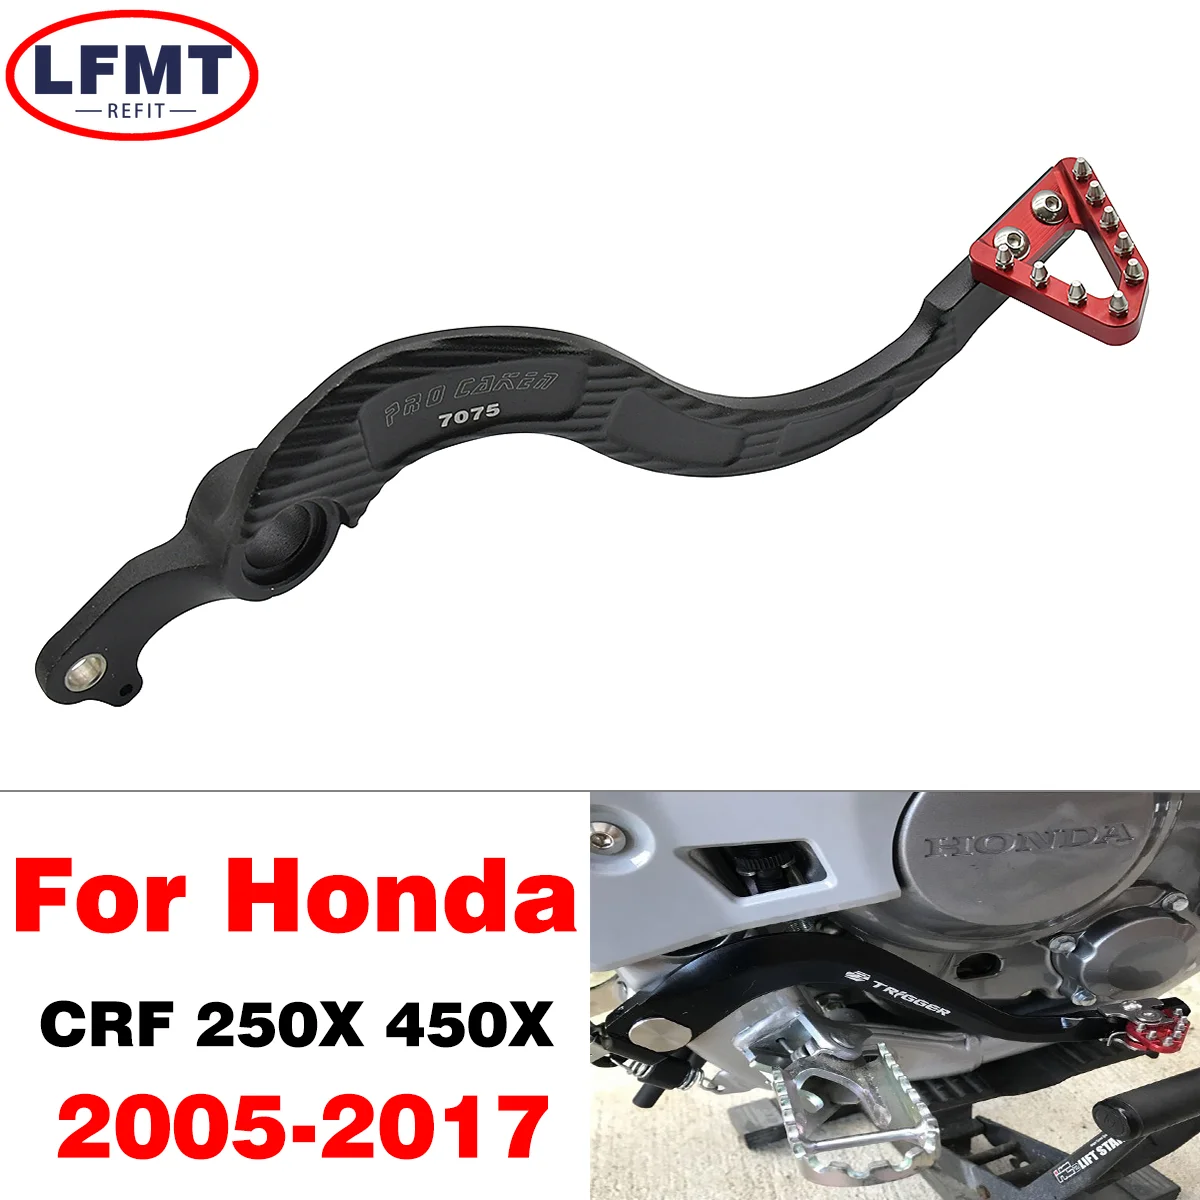 

Motorcycle CNC Forged Rear Brake Pedal Lever For Honda CRF250R CRF450R CRF450RX 2002-2020 CRF250X CRF450X 2005-2017 CRF 250 450